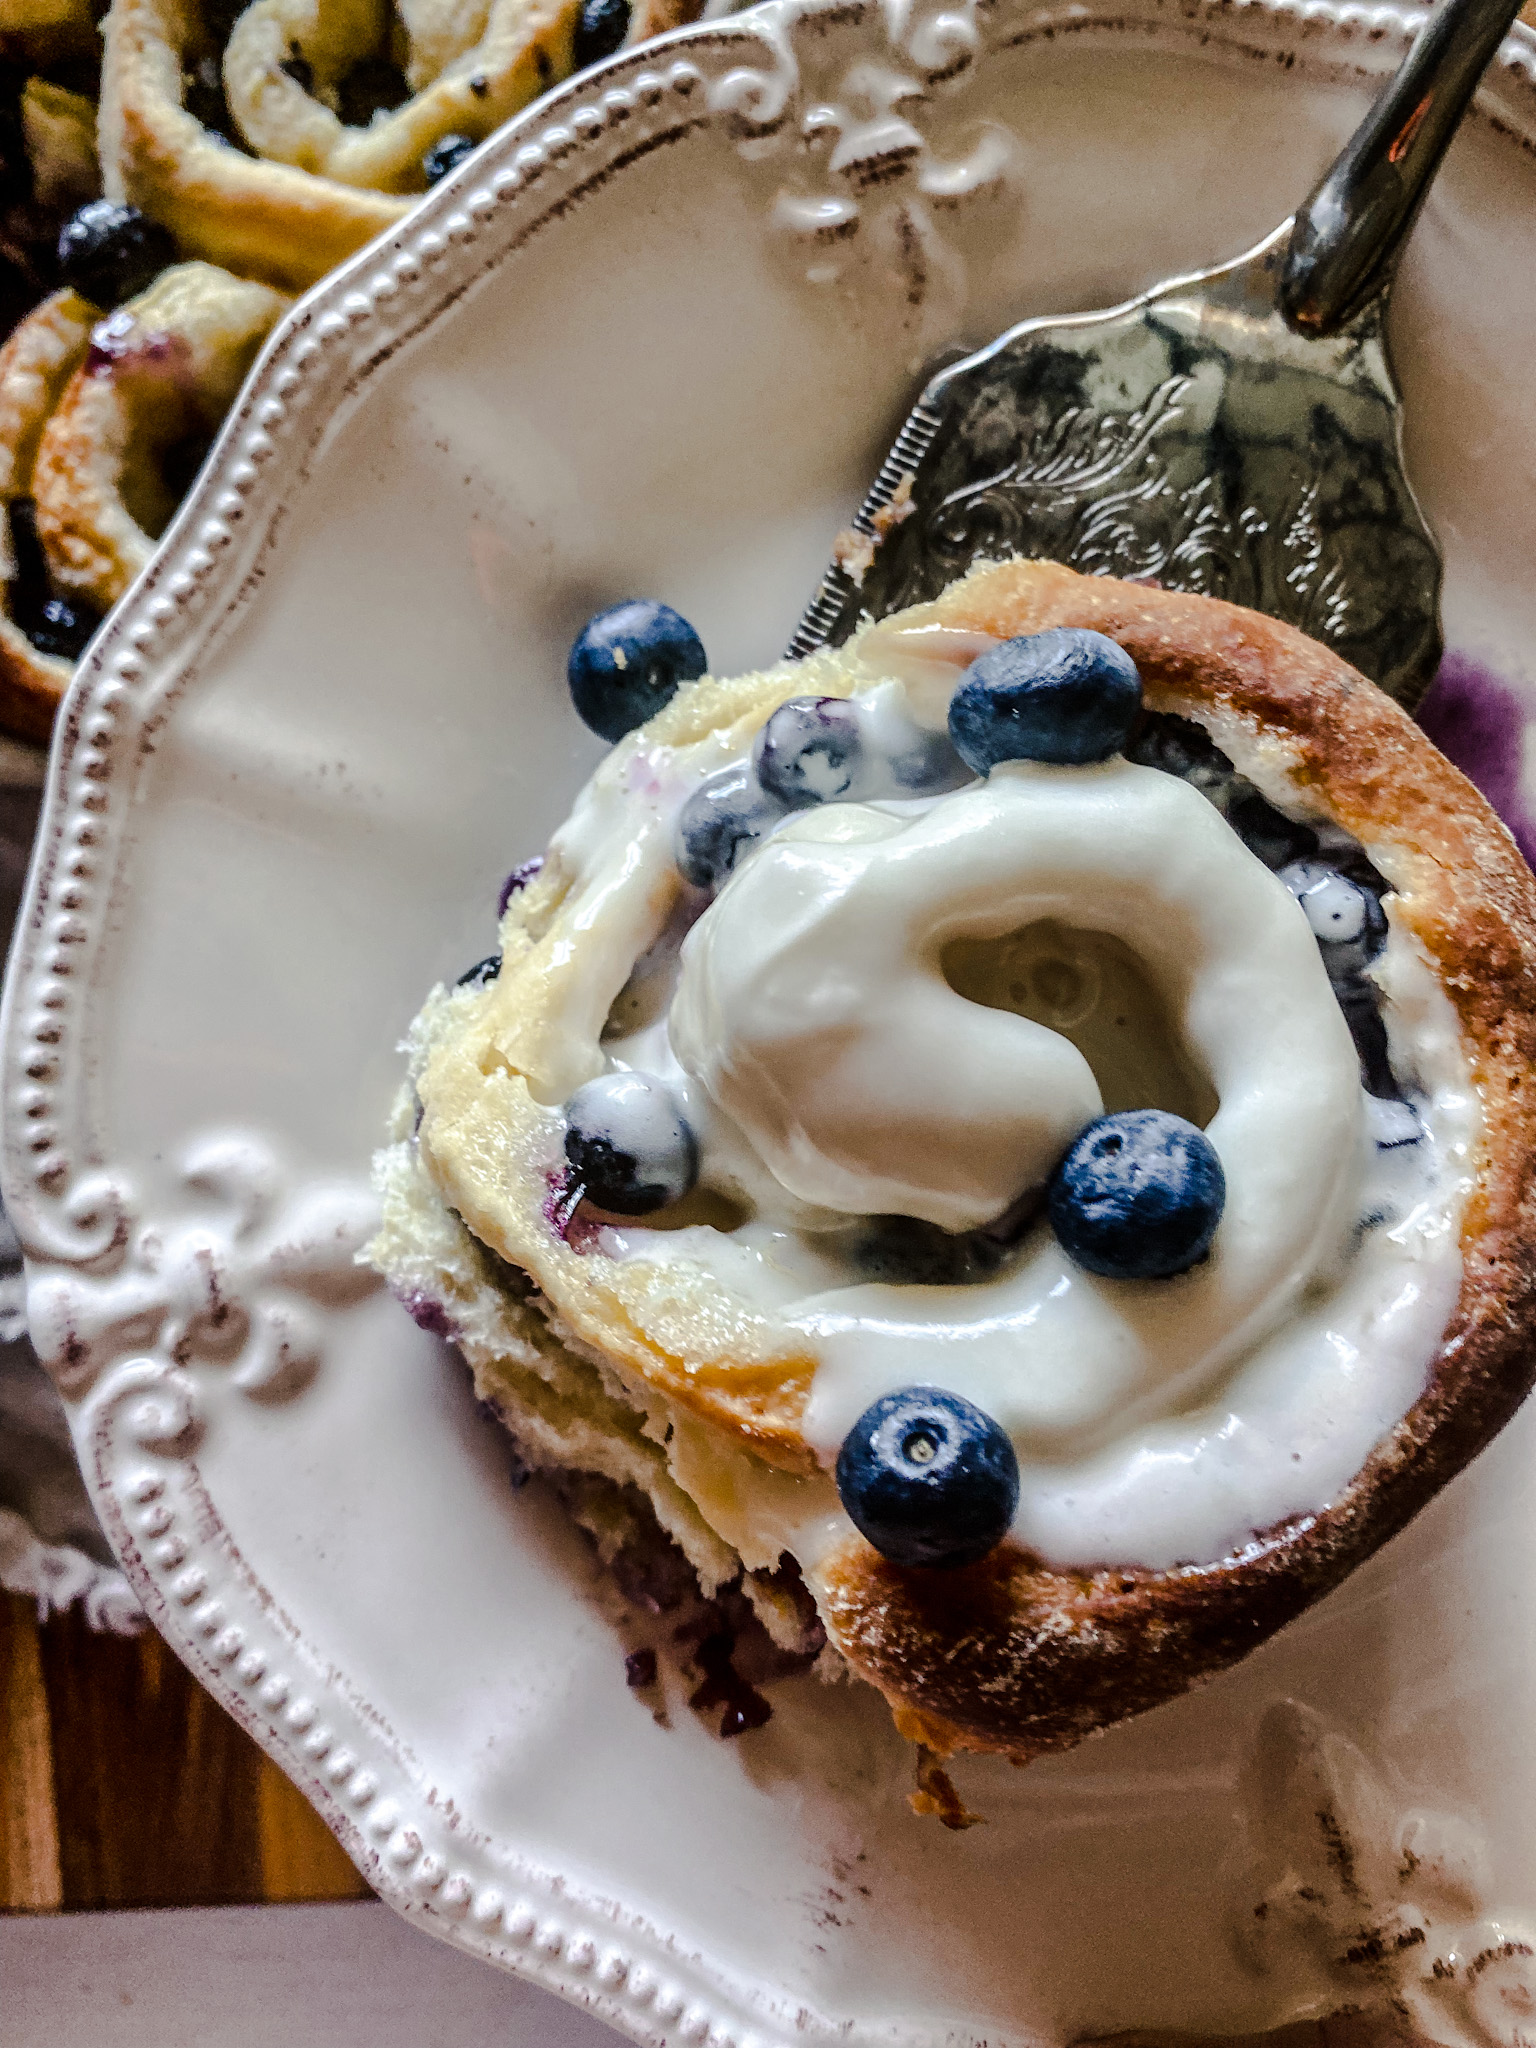 blueberry sweet roll with lemon cream cheese frosting being served onto a white plate